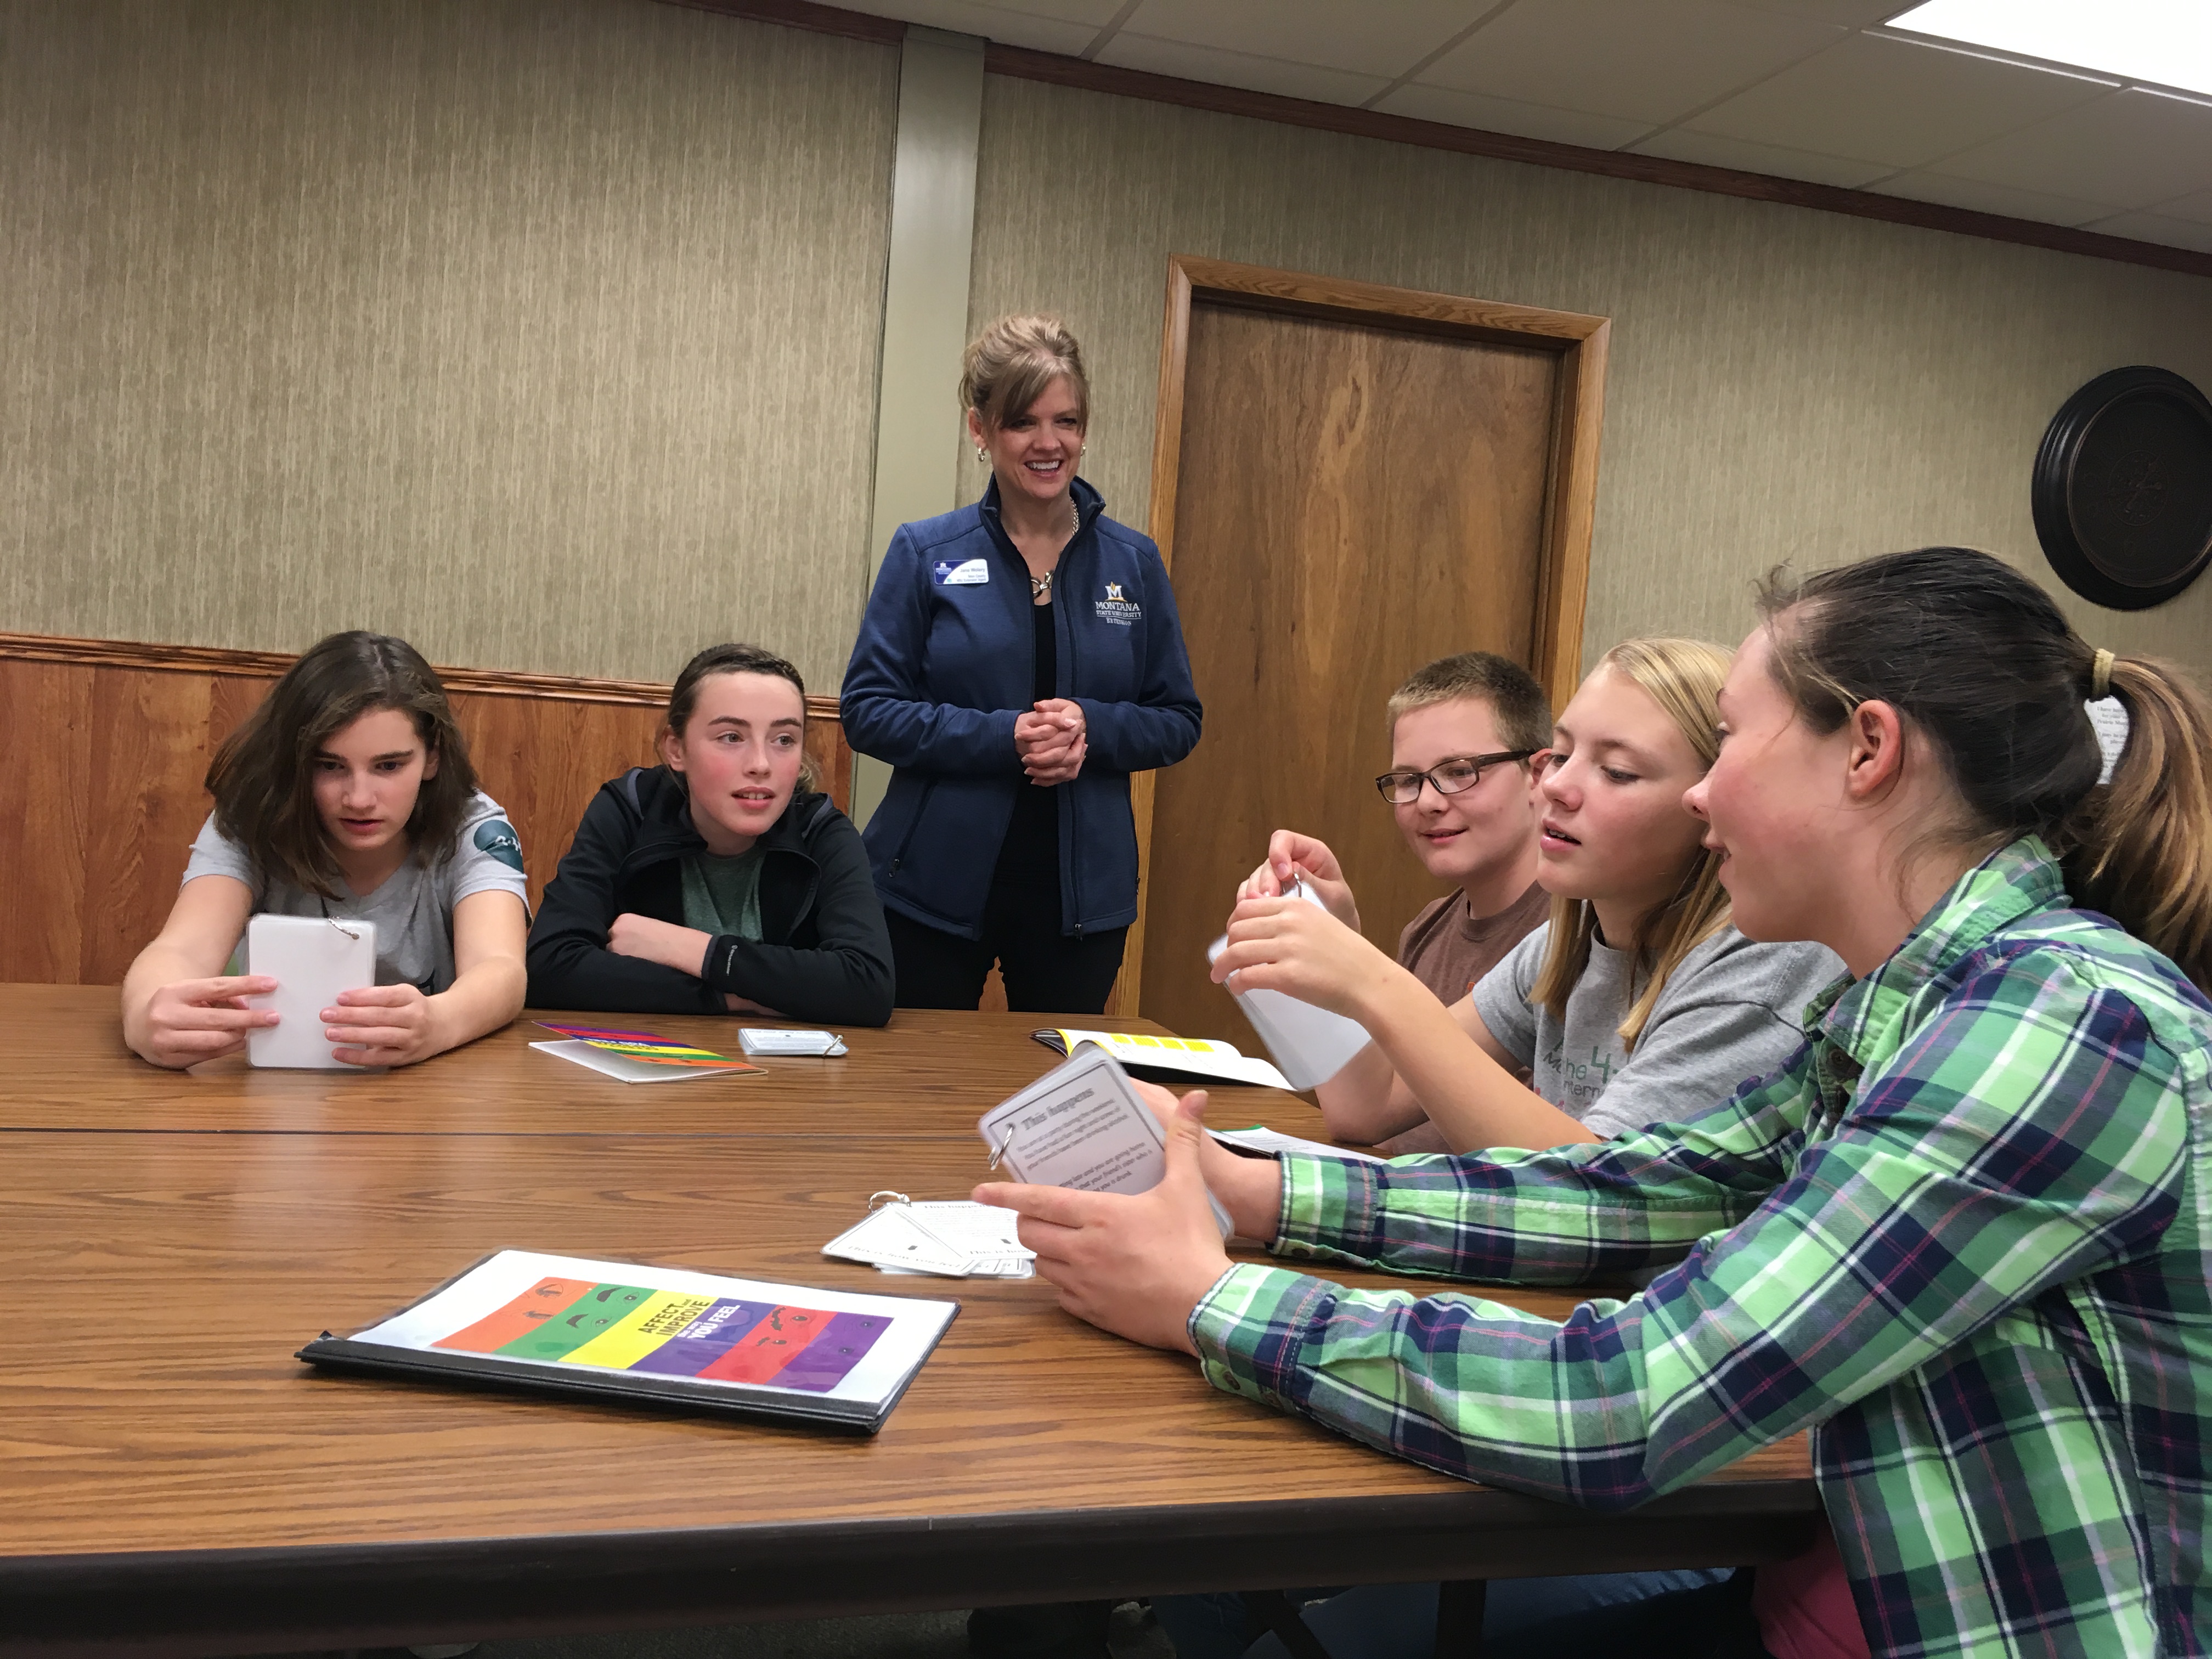 Jane Wolery of Teton County educates a group of students during a Youth and Mental Health session.